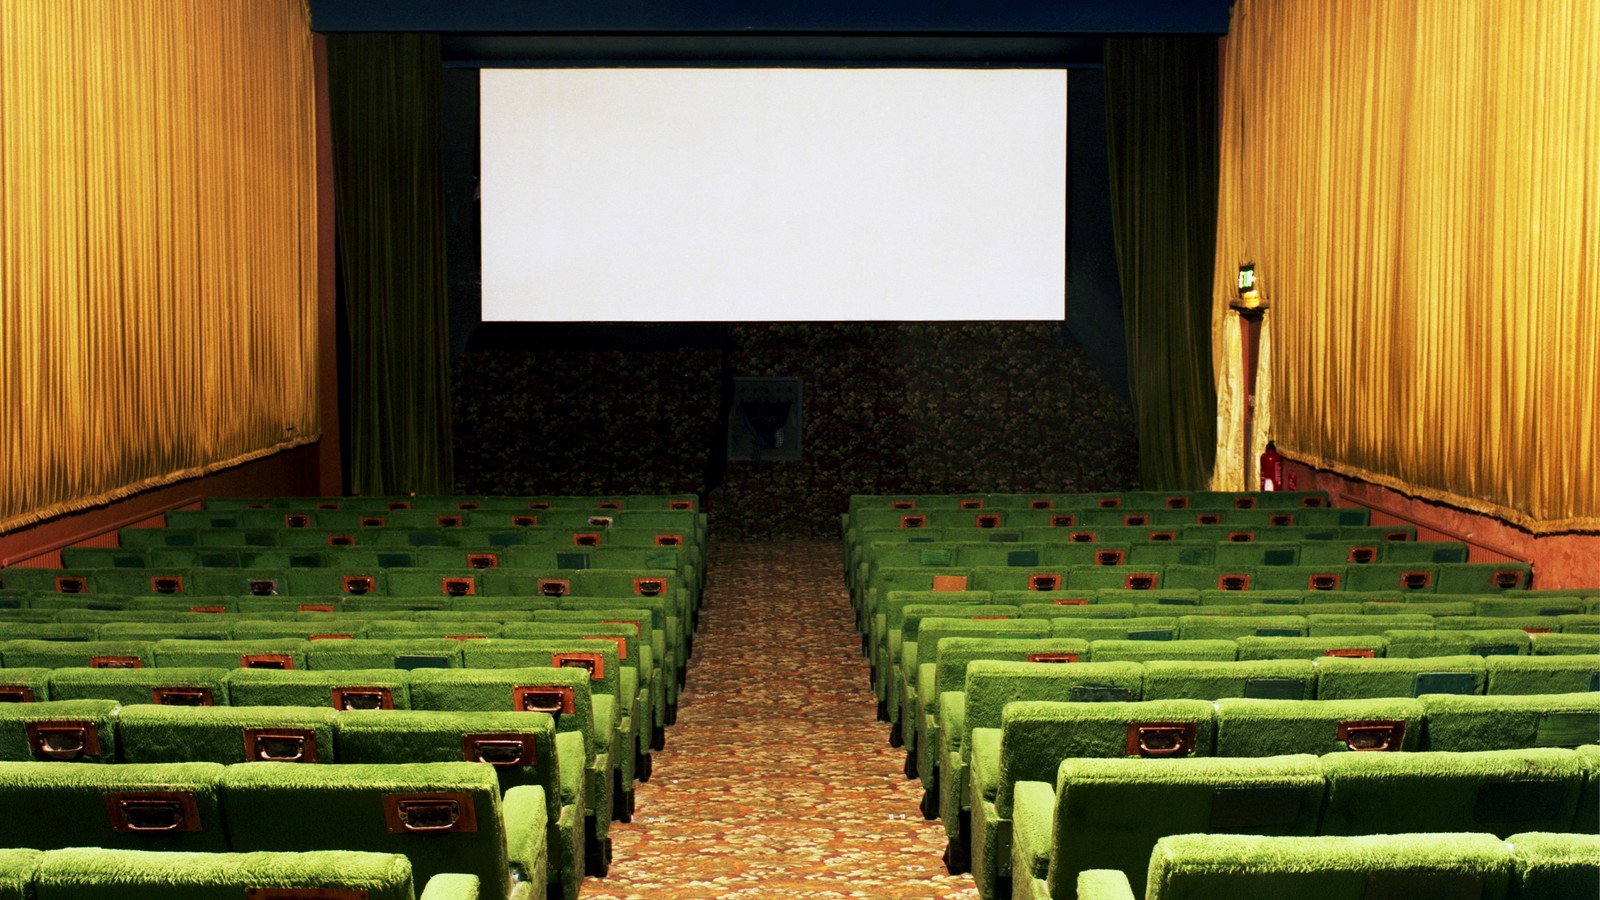 Movies? Verdicts? You're in the right place. - Cineroom